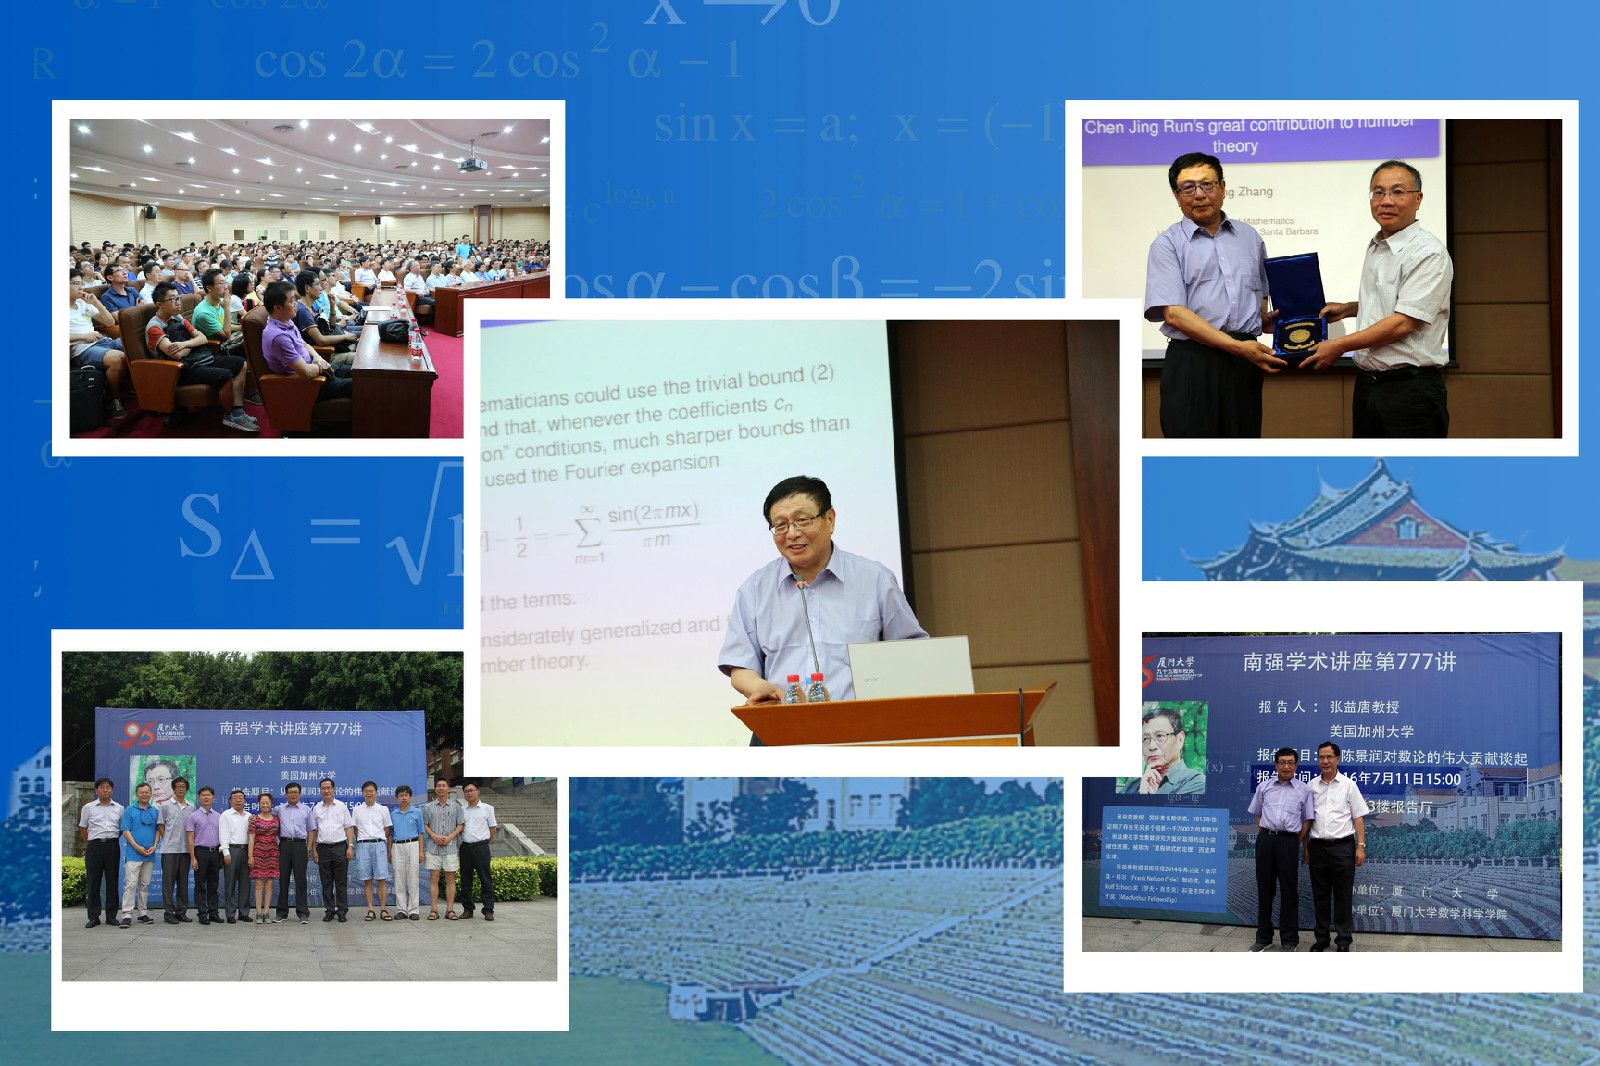 Professor Yitang Zhang was invited to deliver a talk